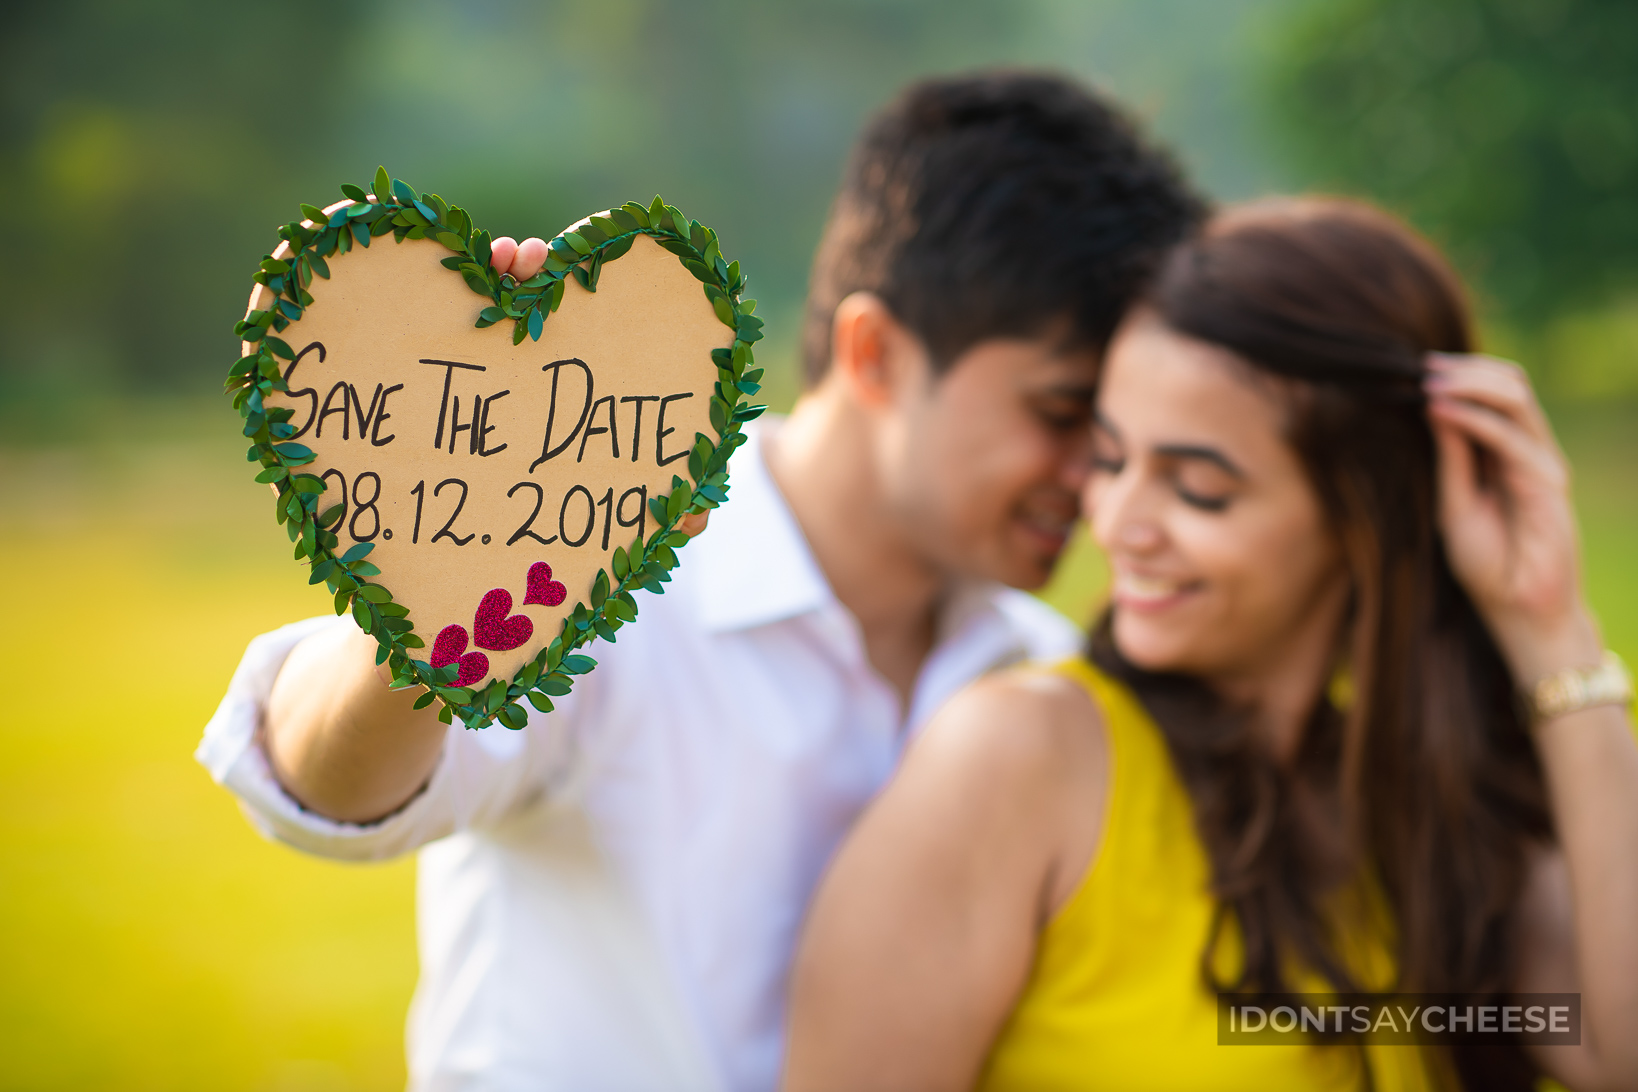 Save the date Photoshoot